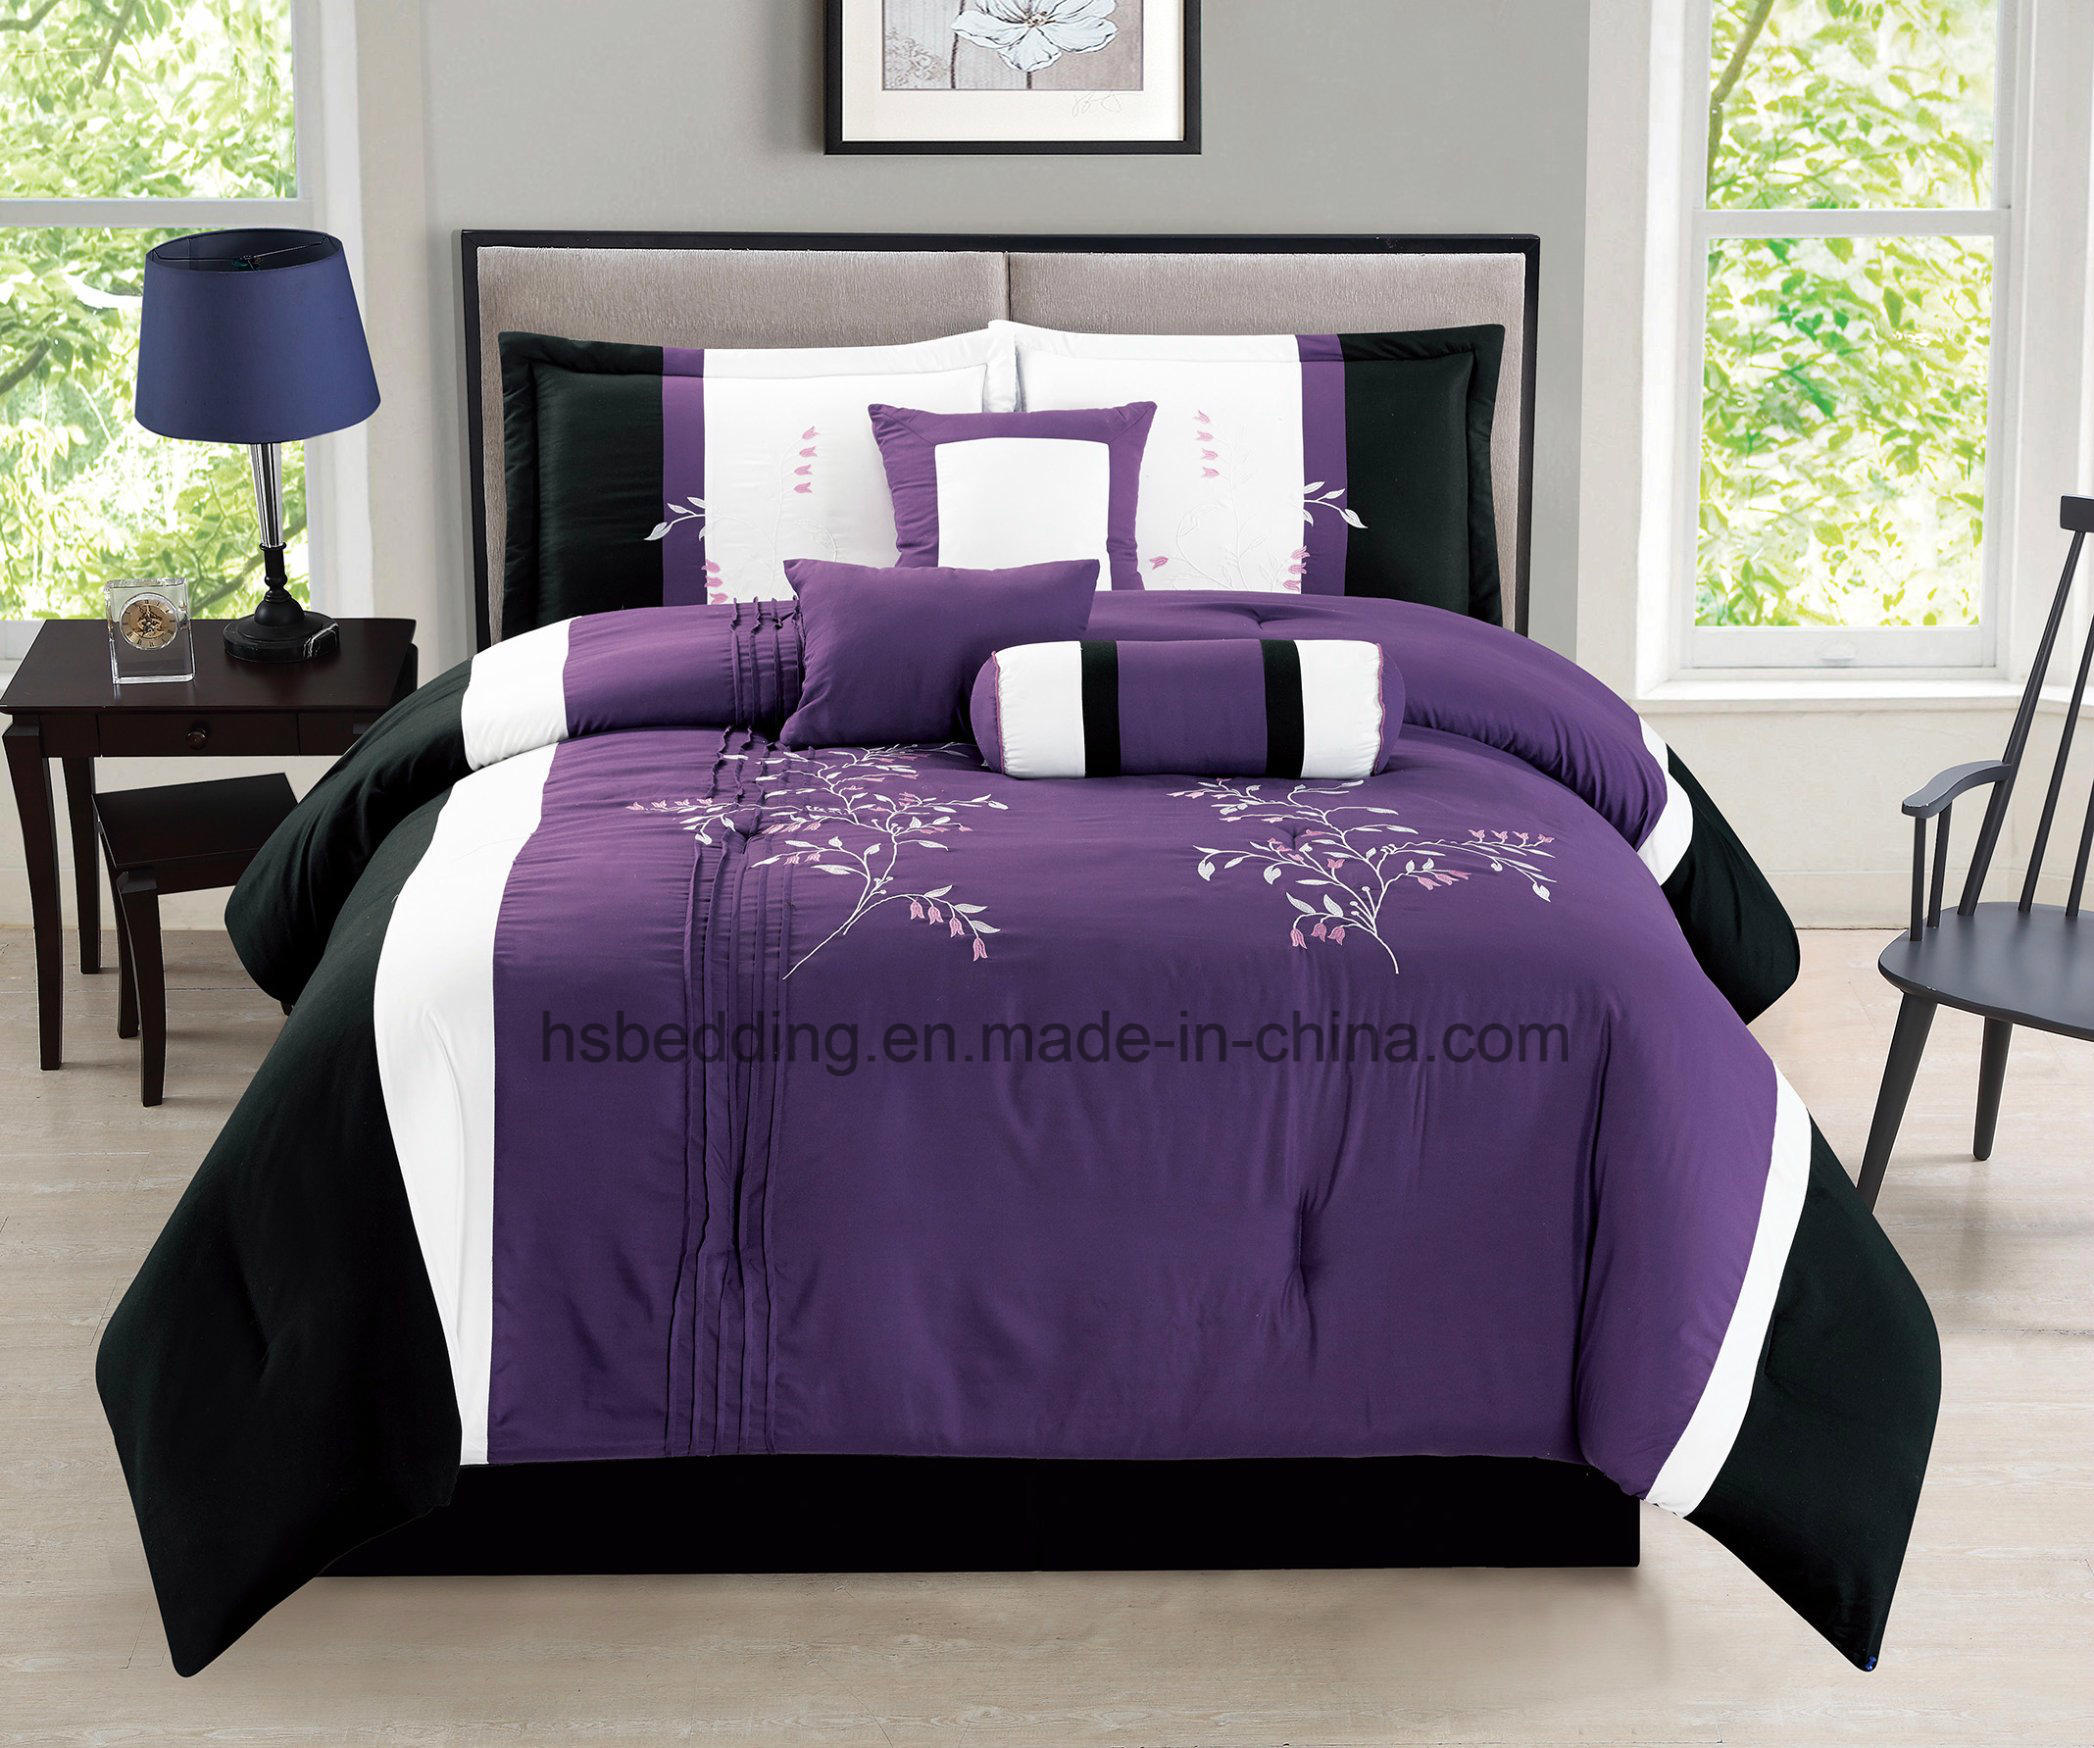 Different Style Luxury Natural Microfiber Comforter Embroidery Bedding Sheet Set